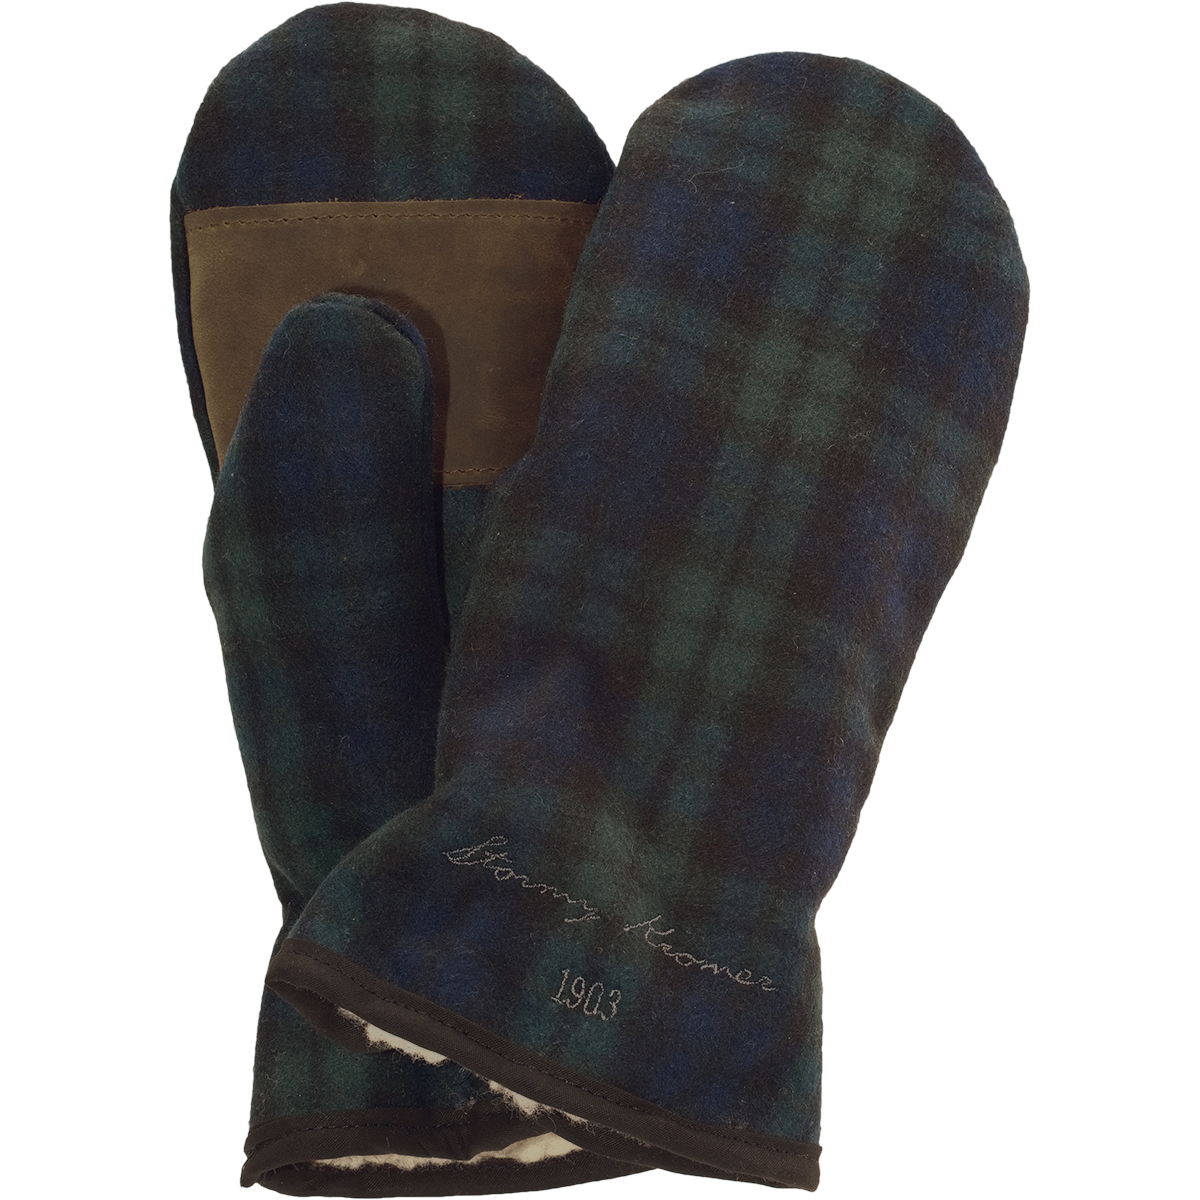 Picture of Stormy Kromer 51890 Ida's Mittens